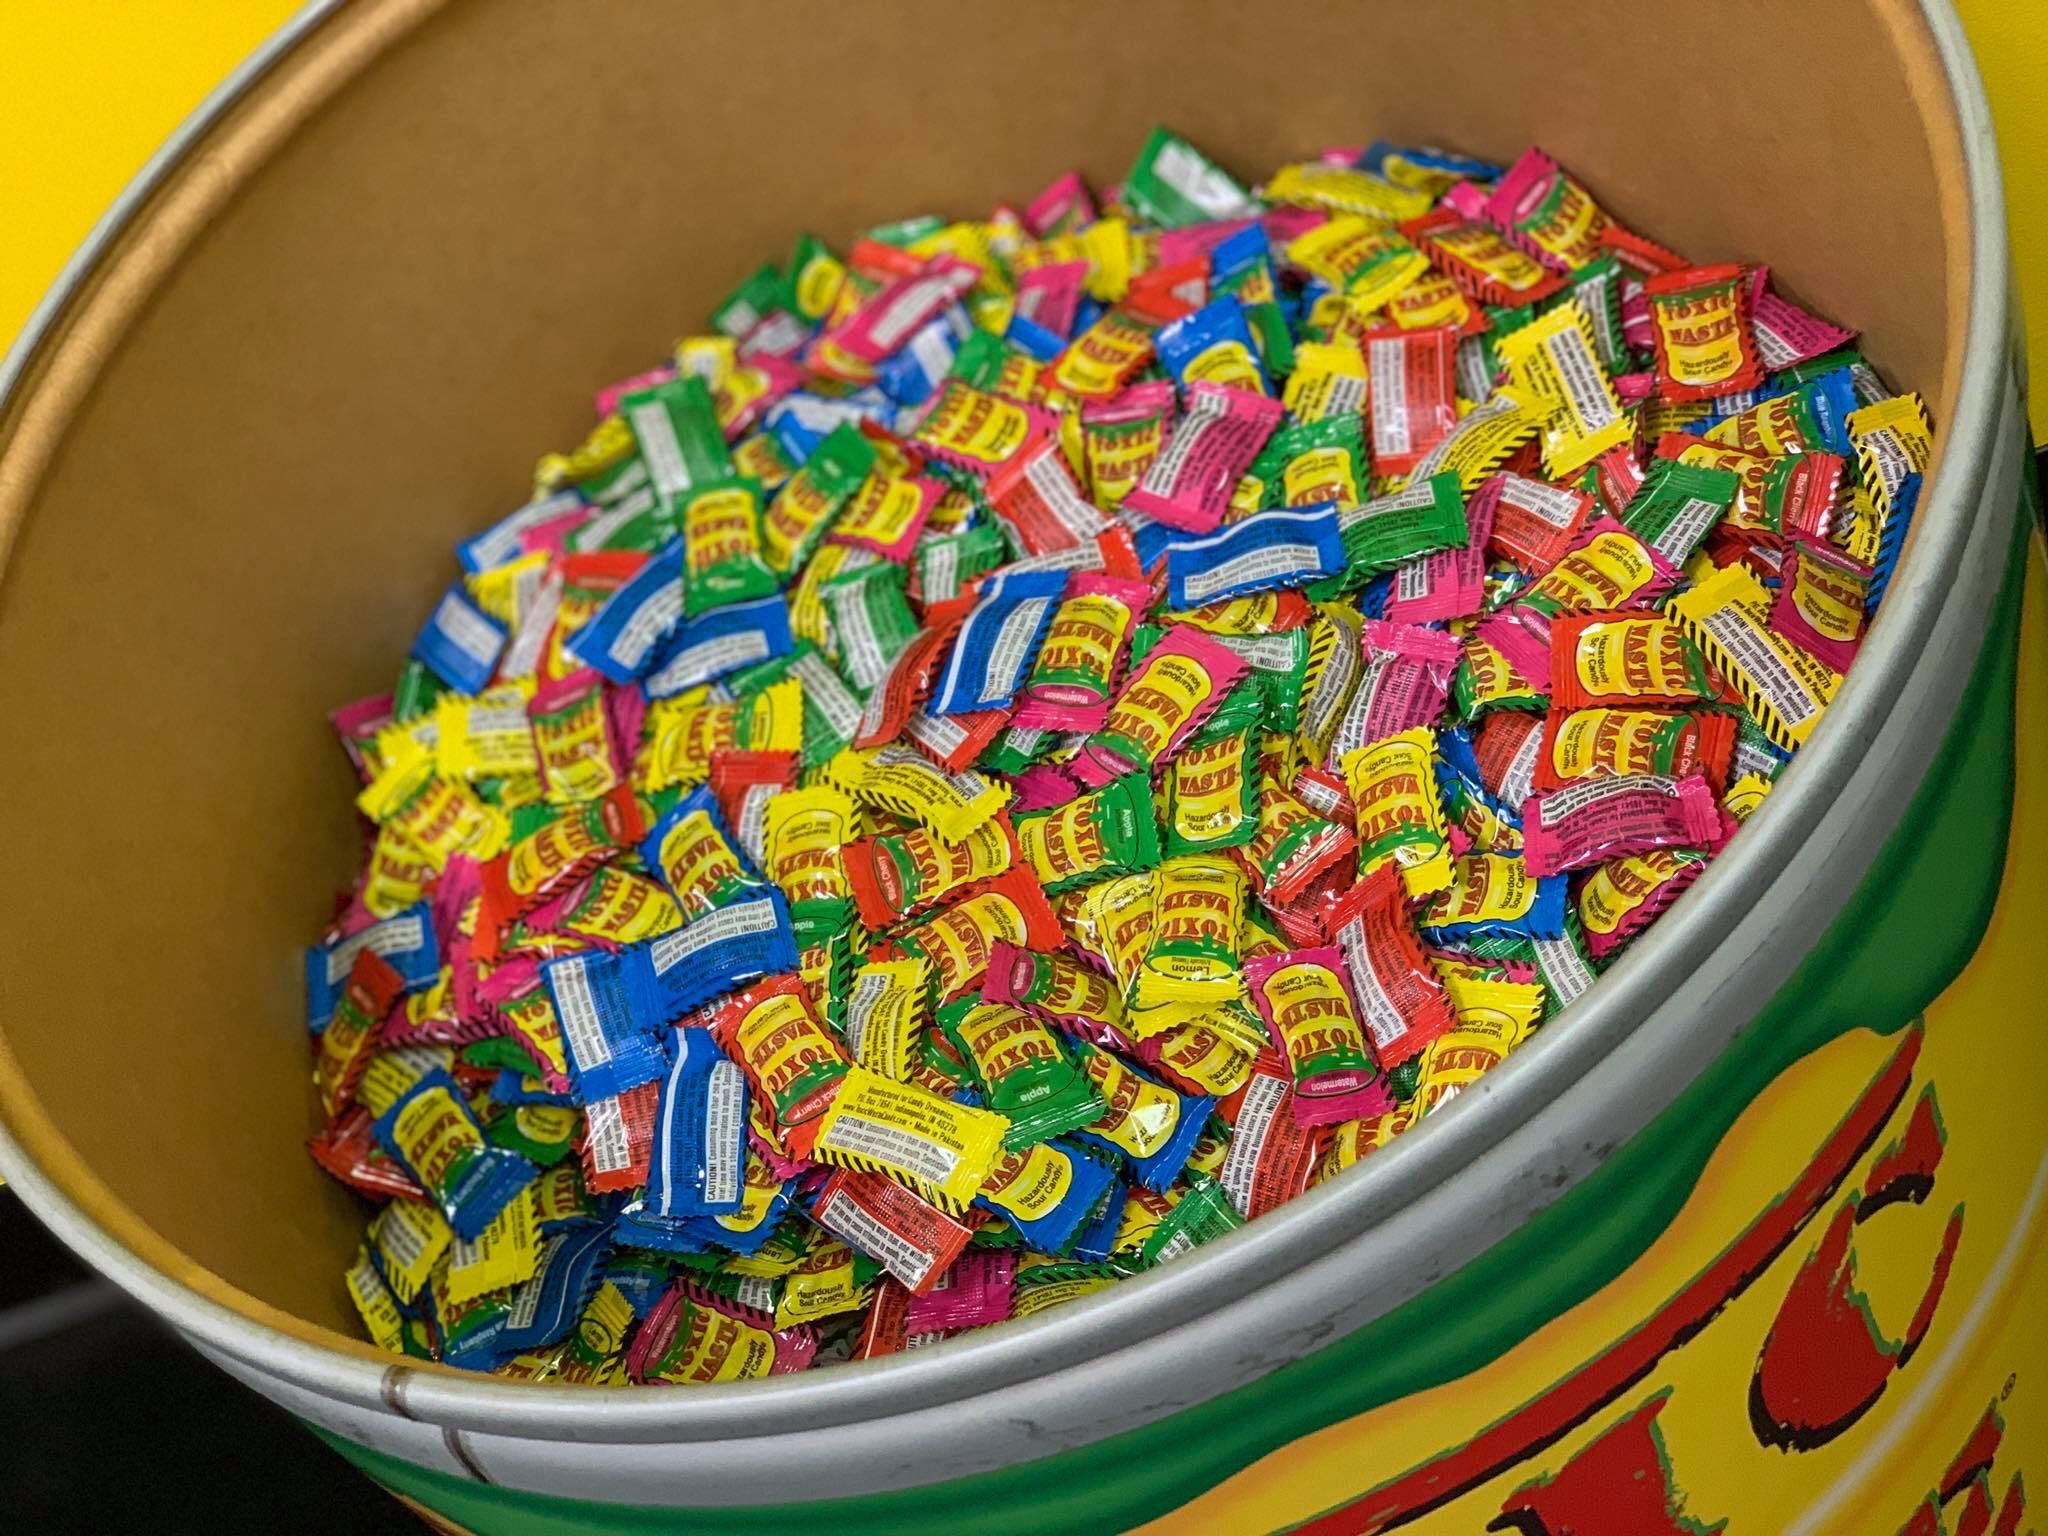 Toxic Waste Candy® you ready for another SOUR SATURDAY?!?! #sour #saturday #toxicwastecandy #candy #soursaturday